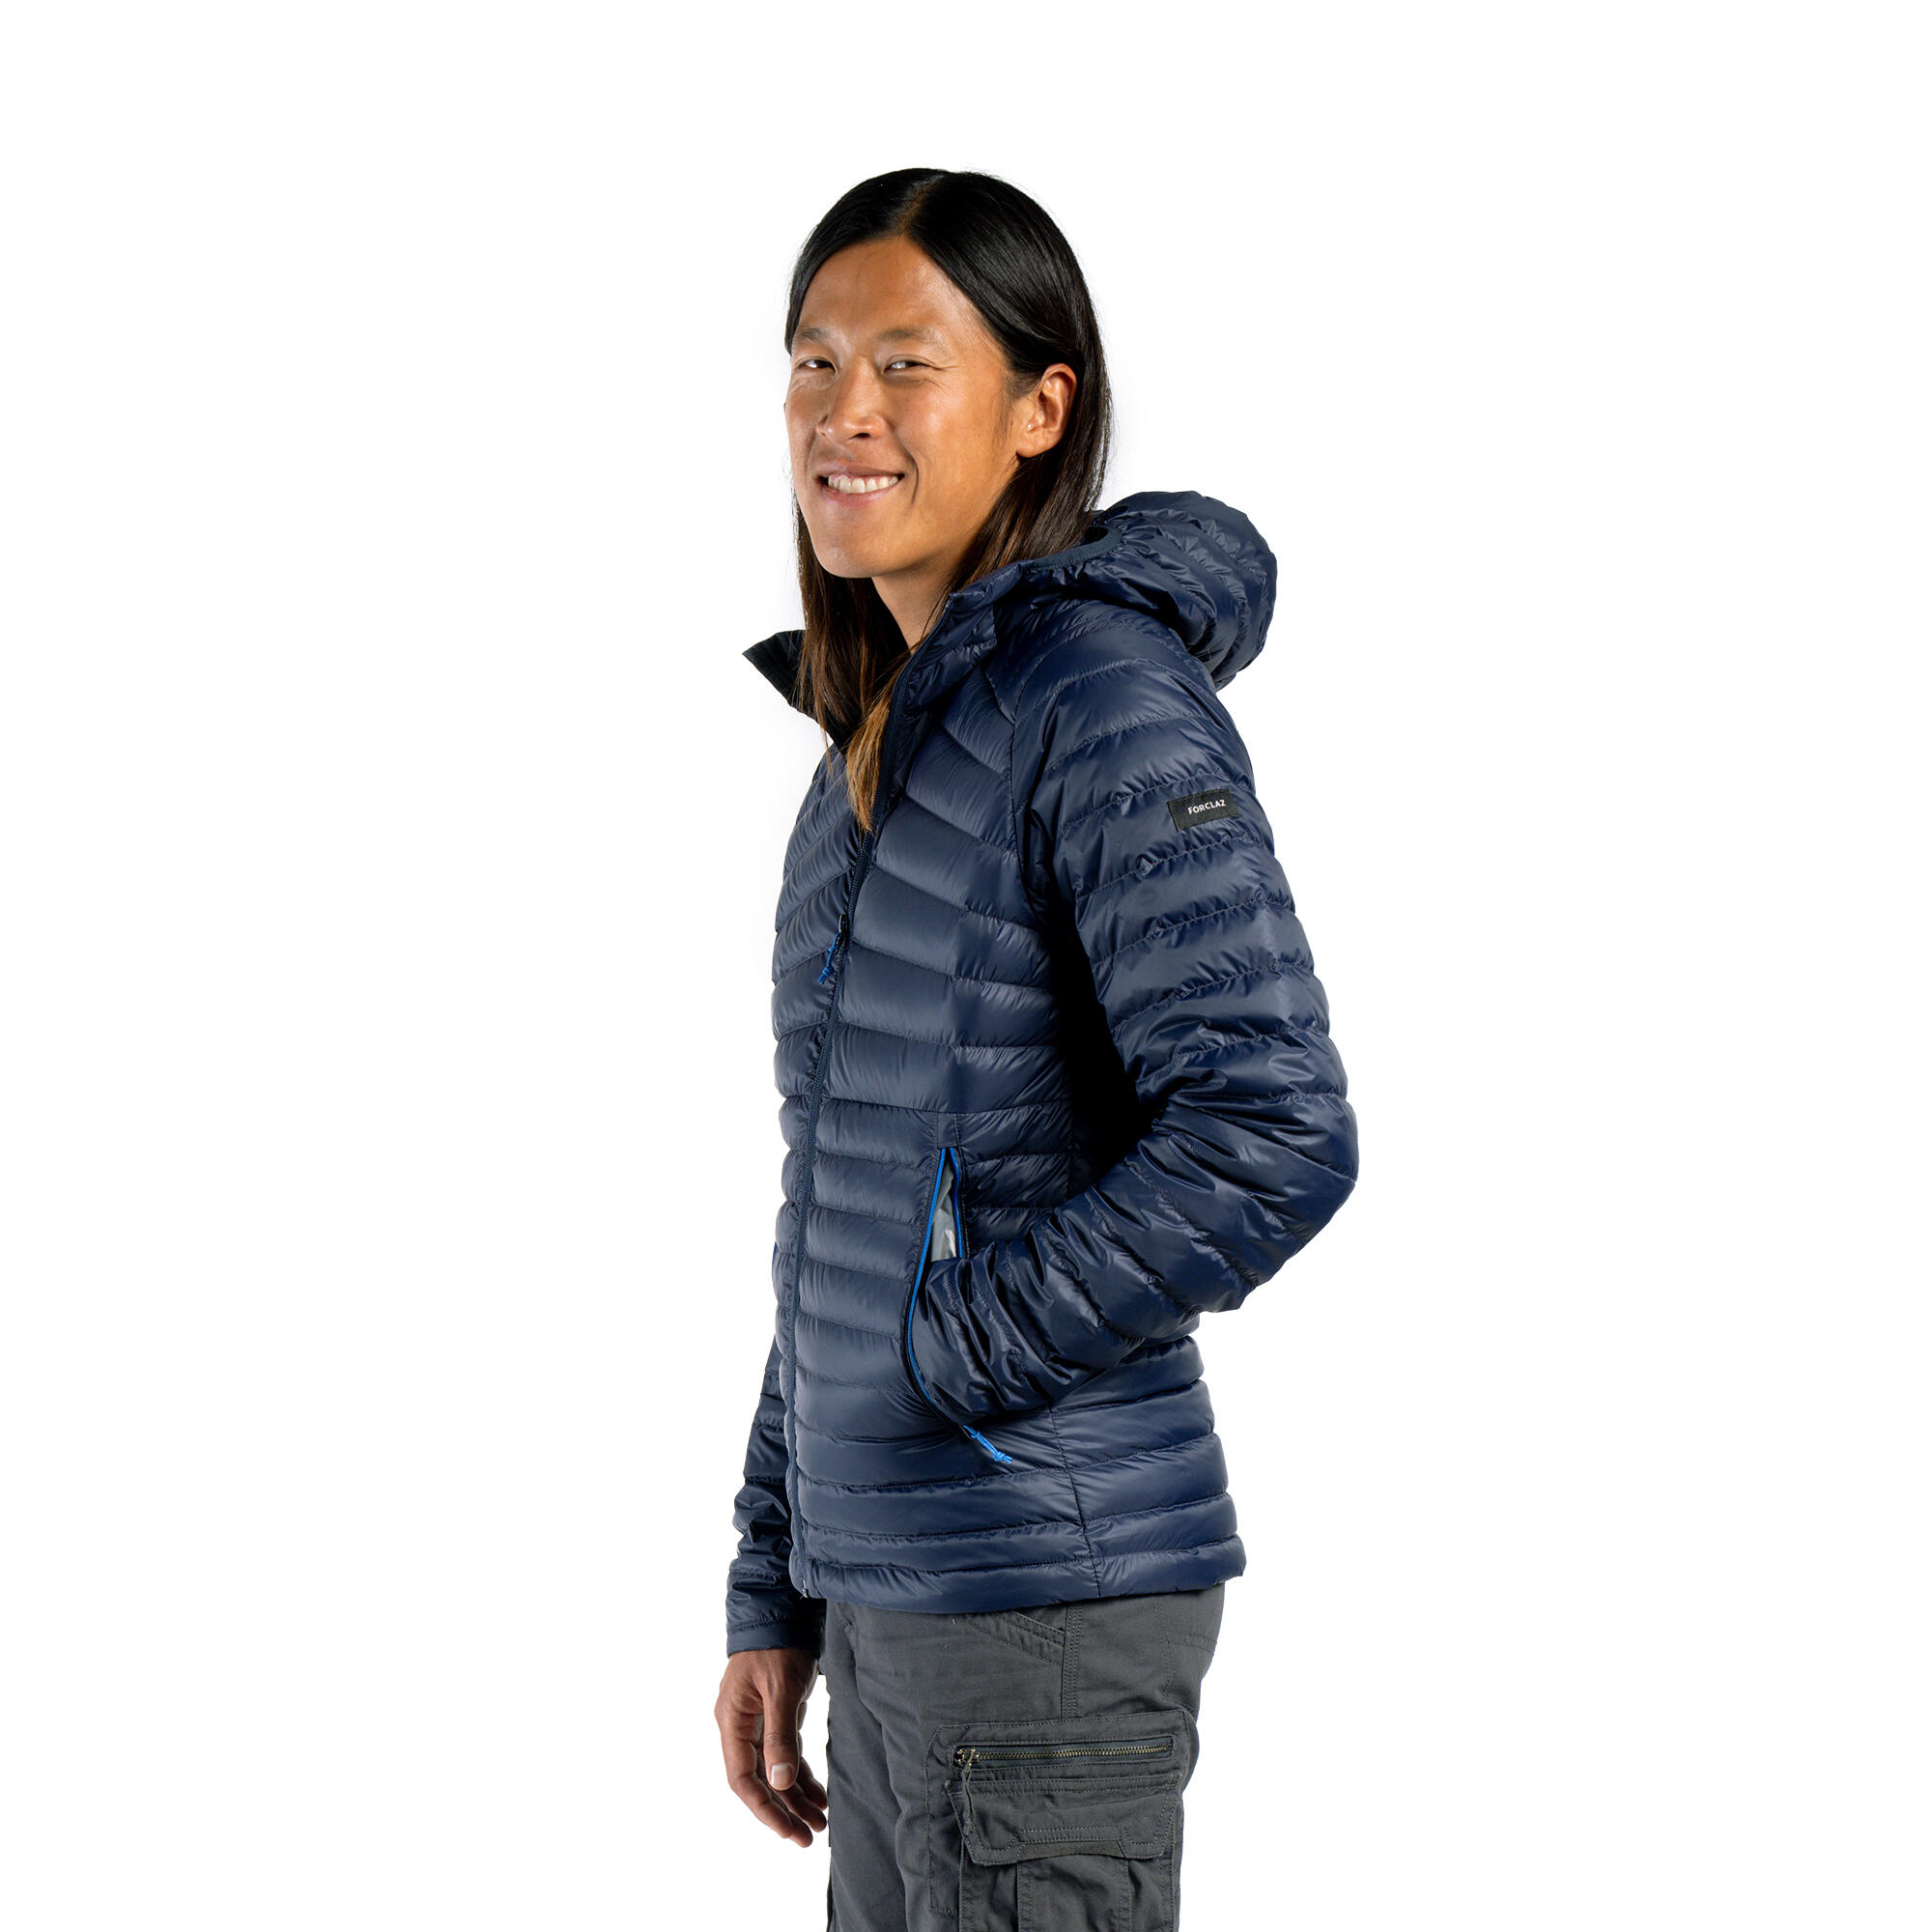 Decathlon Forclaz MT100 Hooded Down Puffer Jacket Review